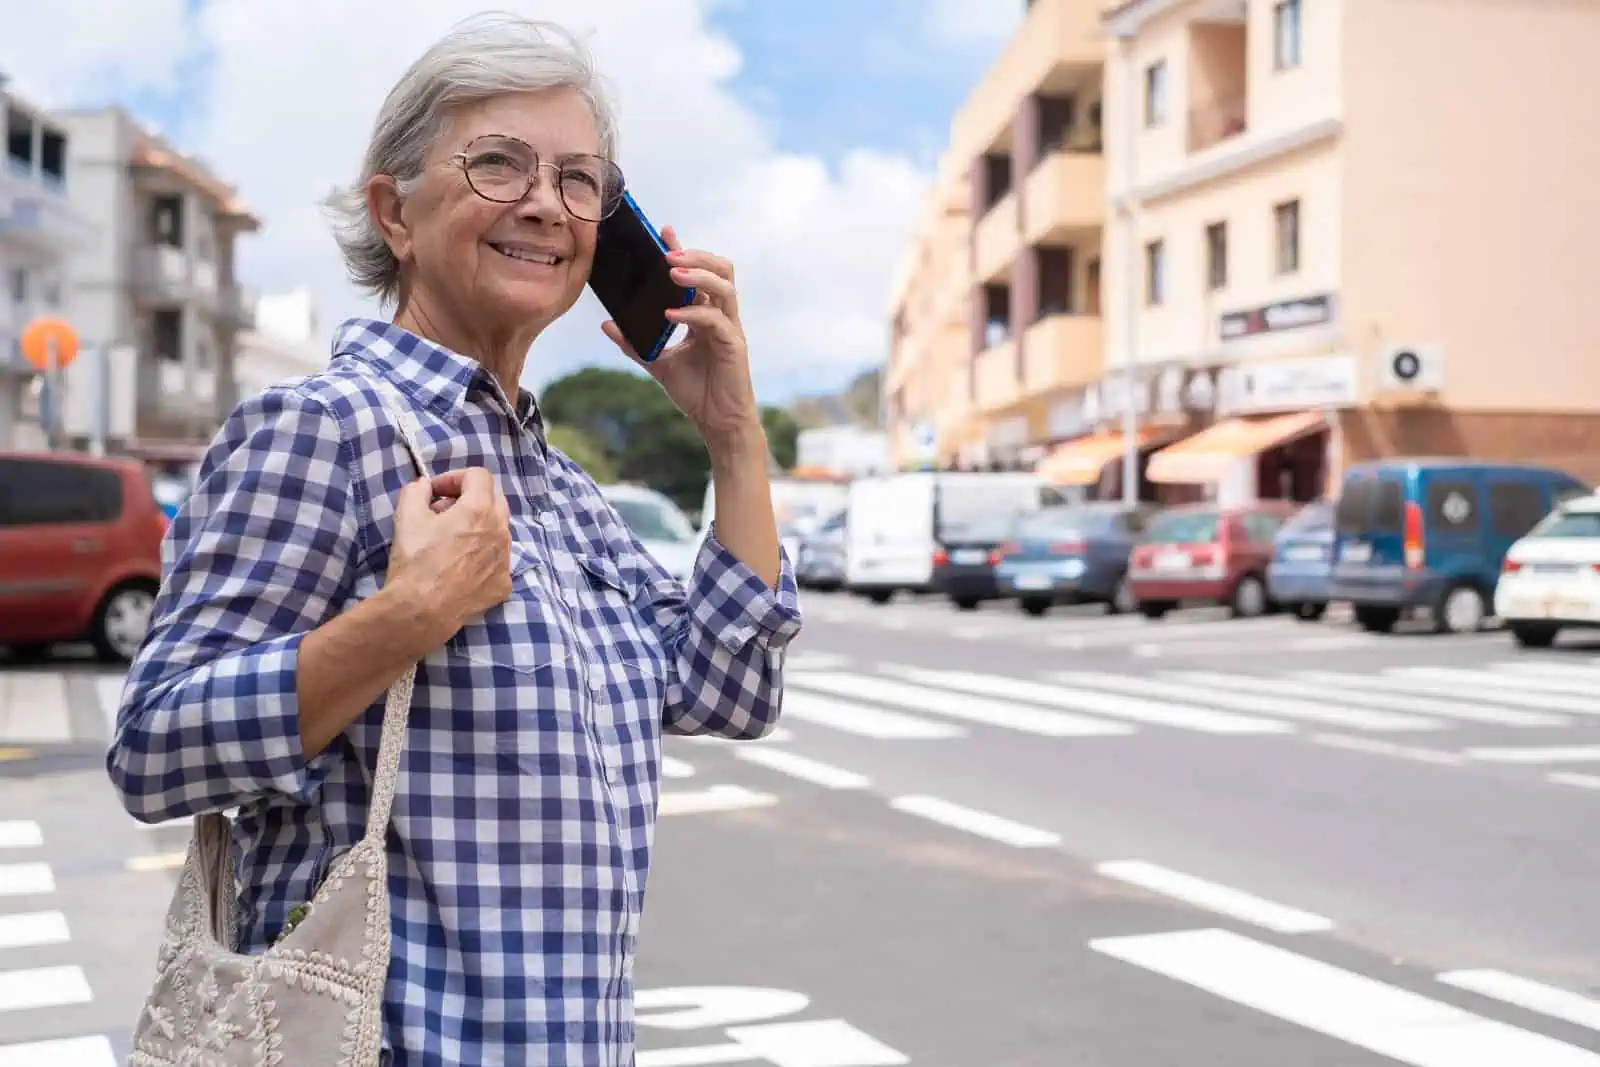 Elderly woman with hearing loss crossing a street